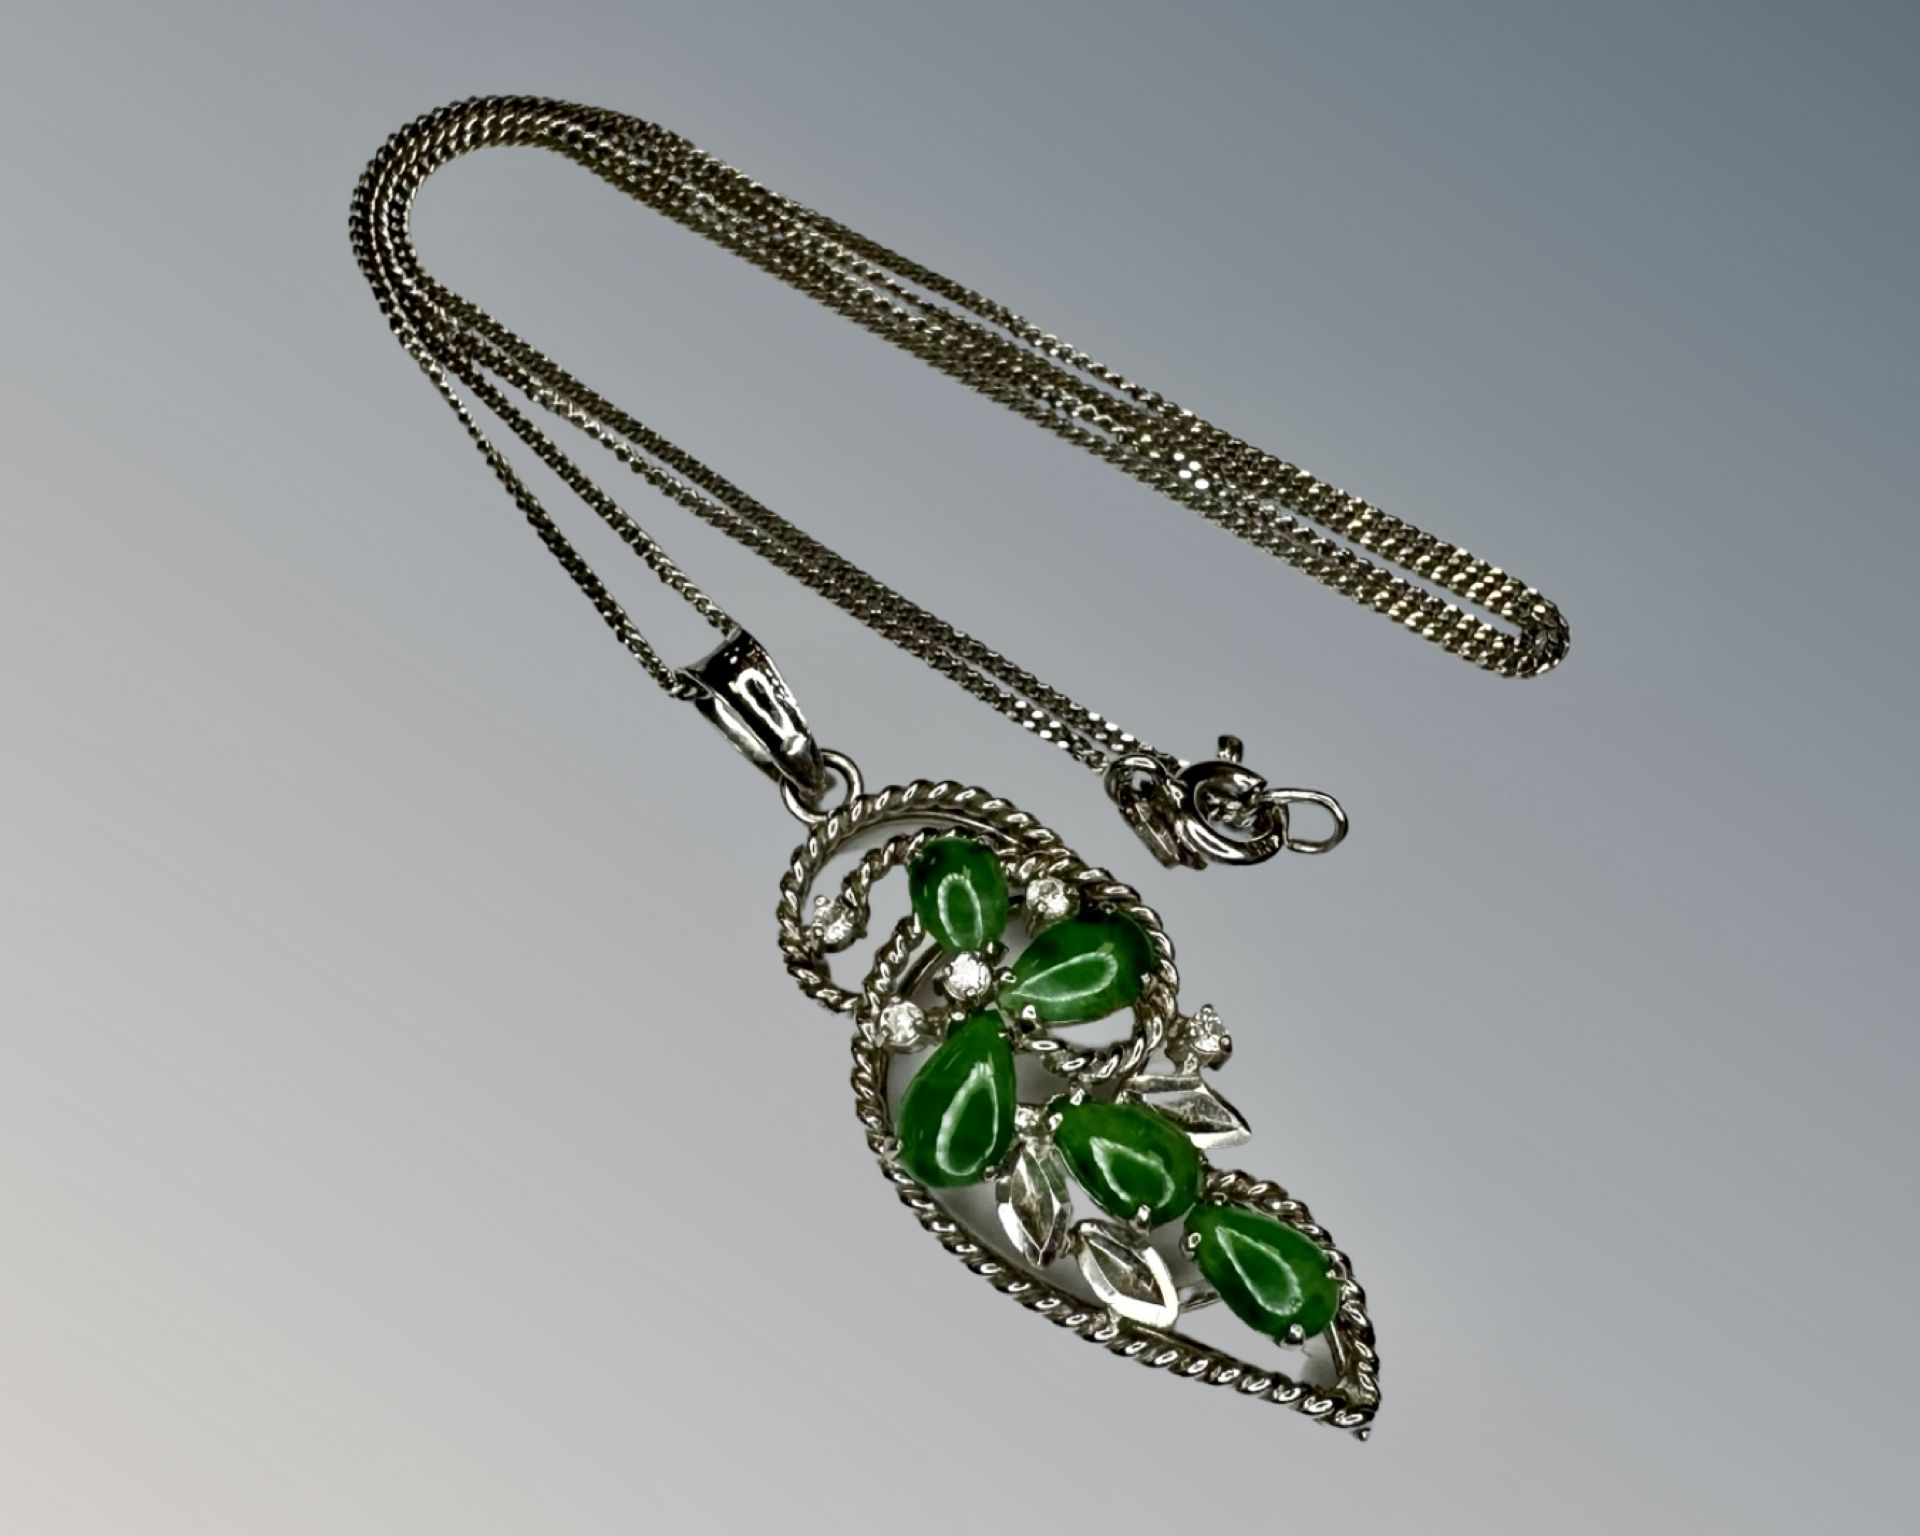 A 9ct white gold jade and diamond pendant on 14ct gold chain.